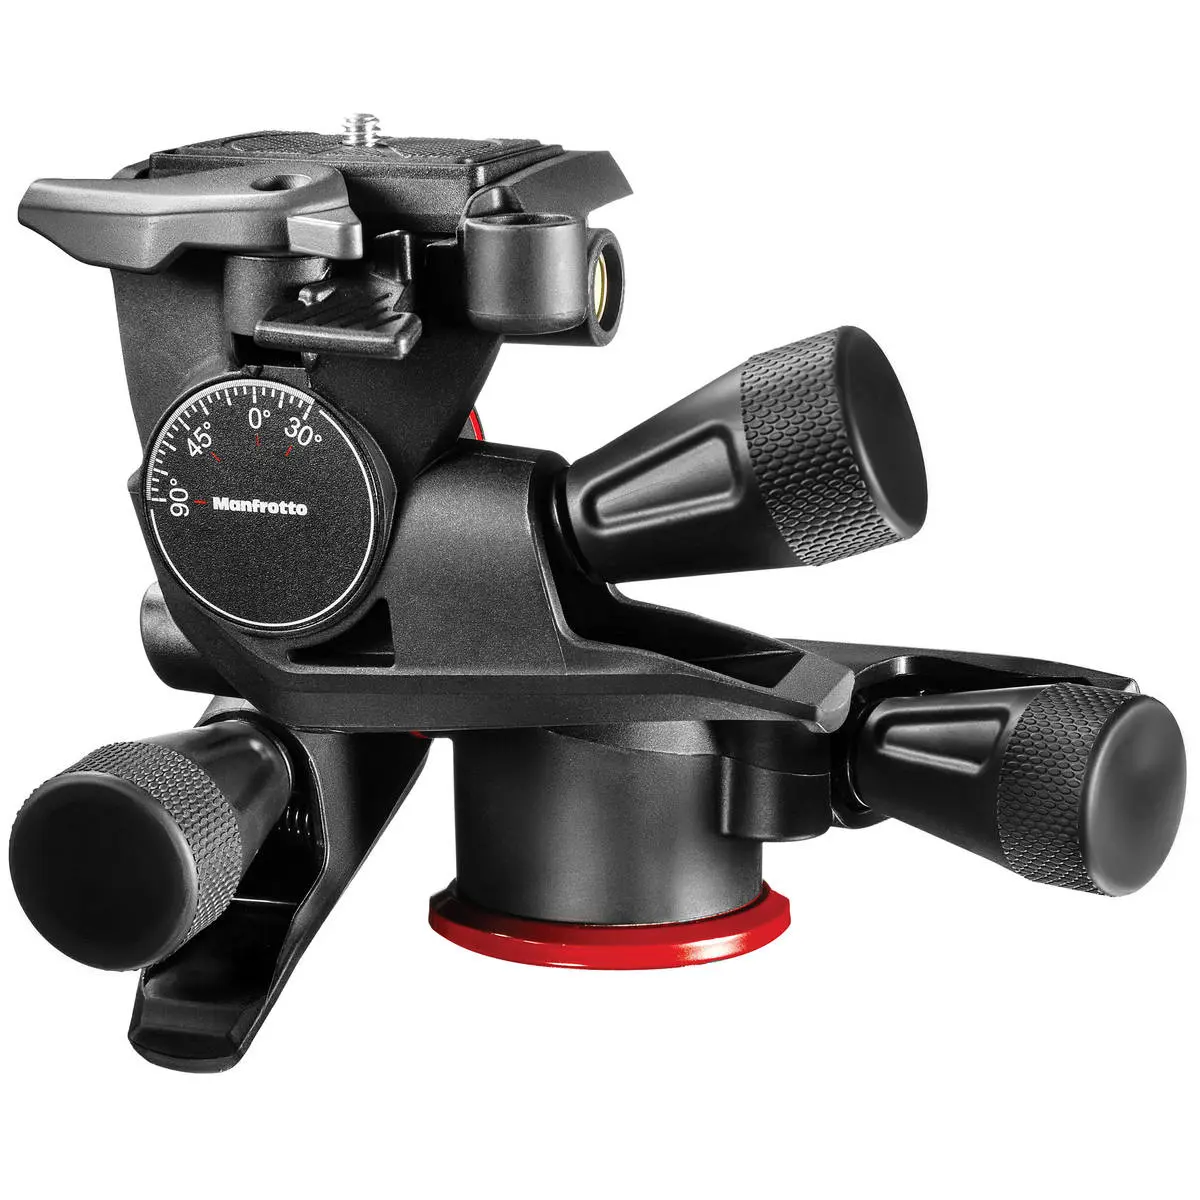 2. Manfrotto Xpro Geared 3-Way Head MHXPRO-3WG